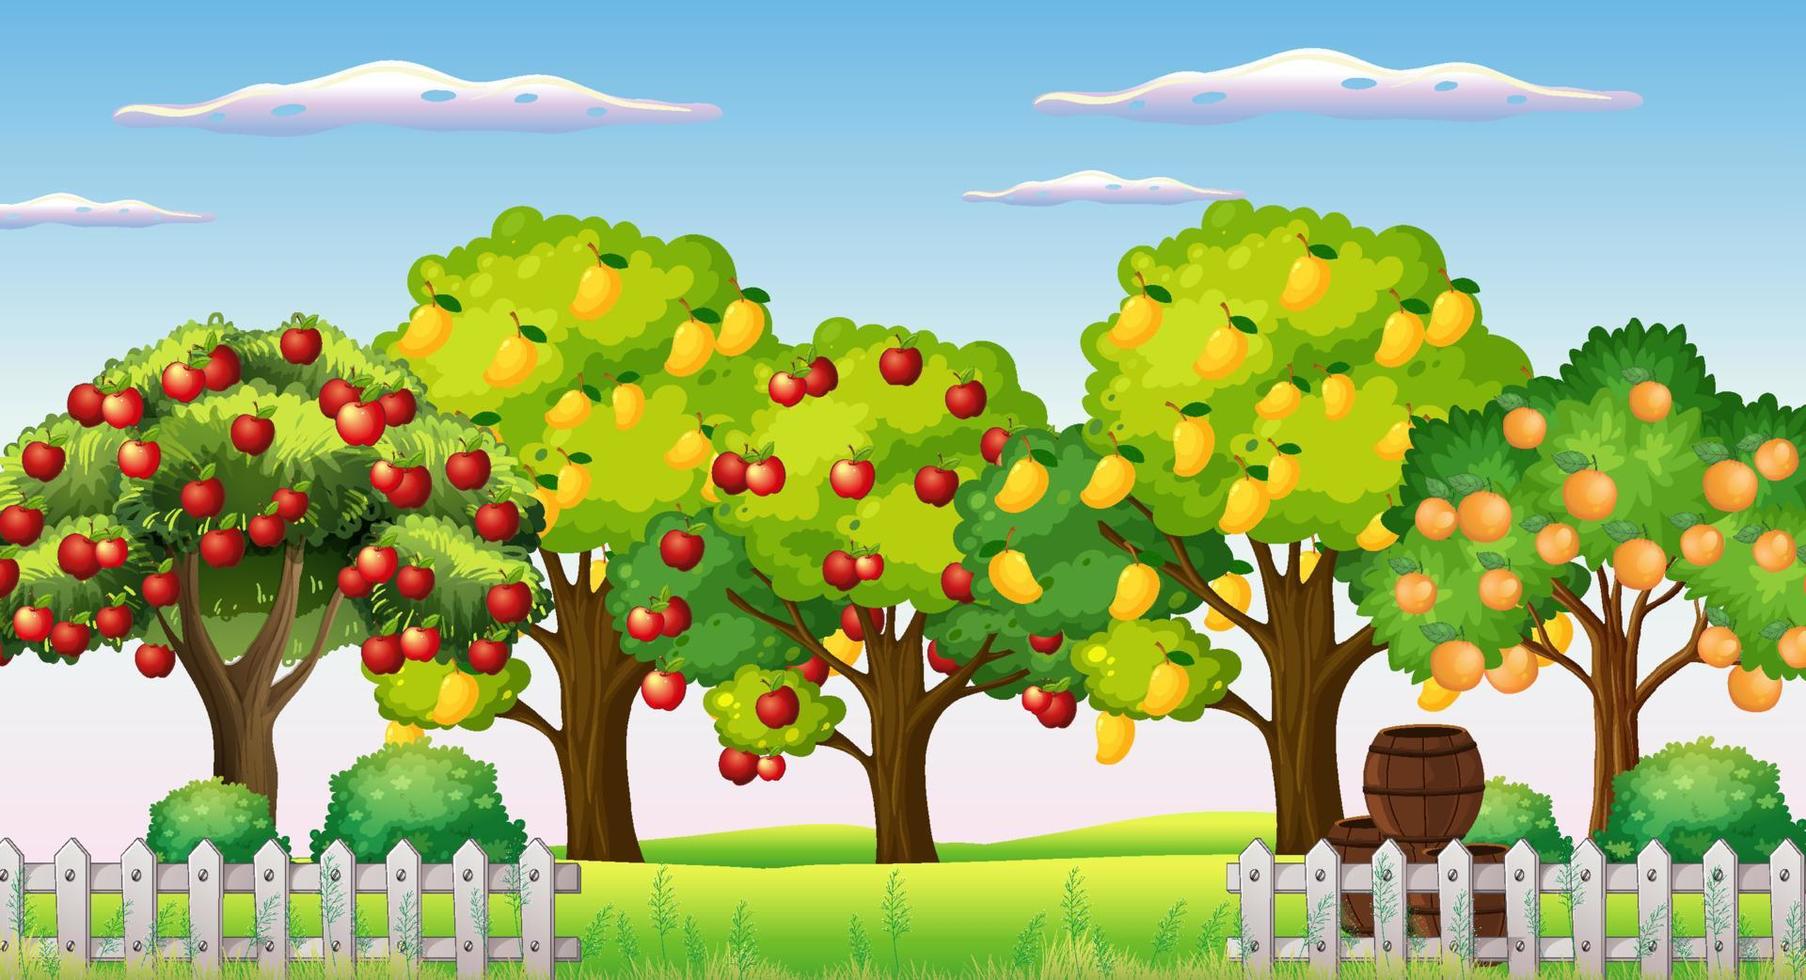 Farm scene with many different fruits trees vector